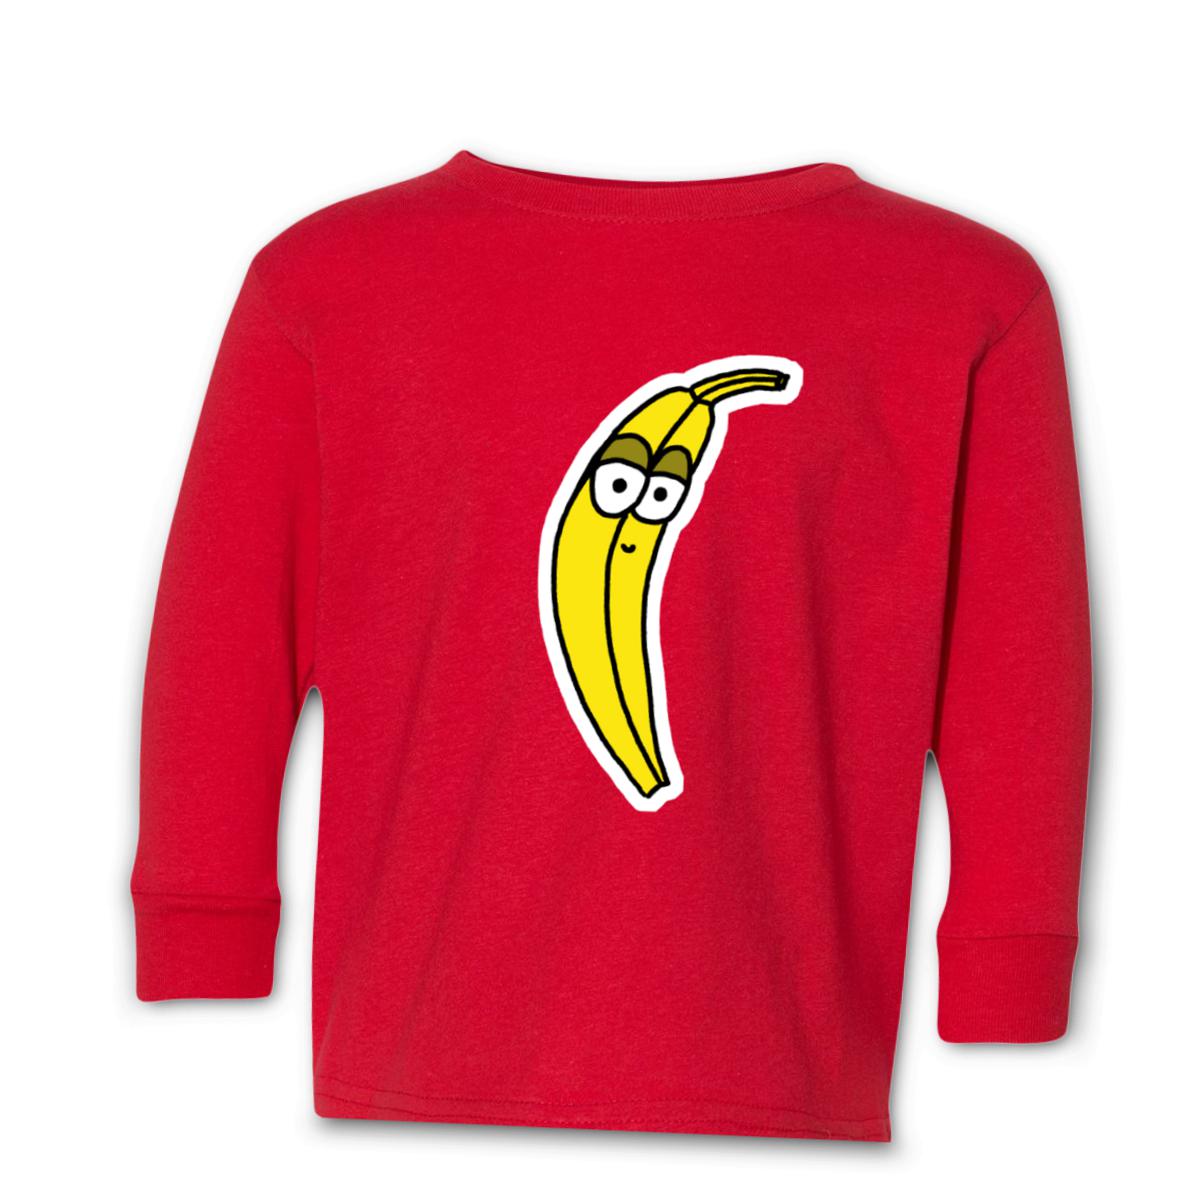 Plantain Toddler Long Sleeve Tee 56T red